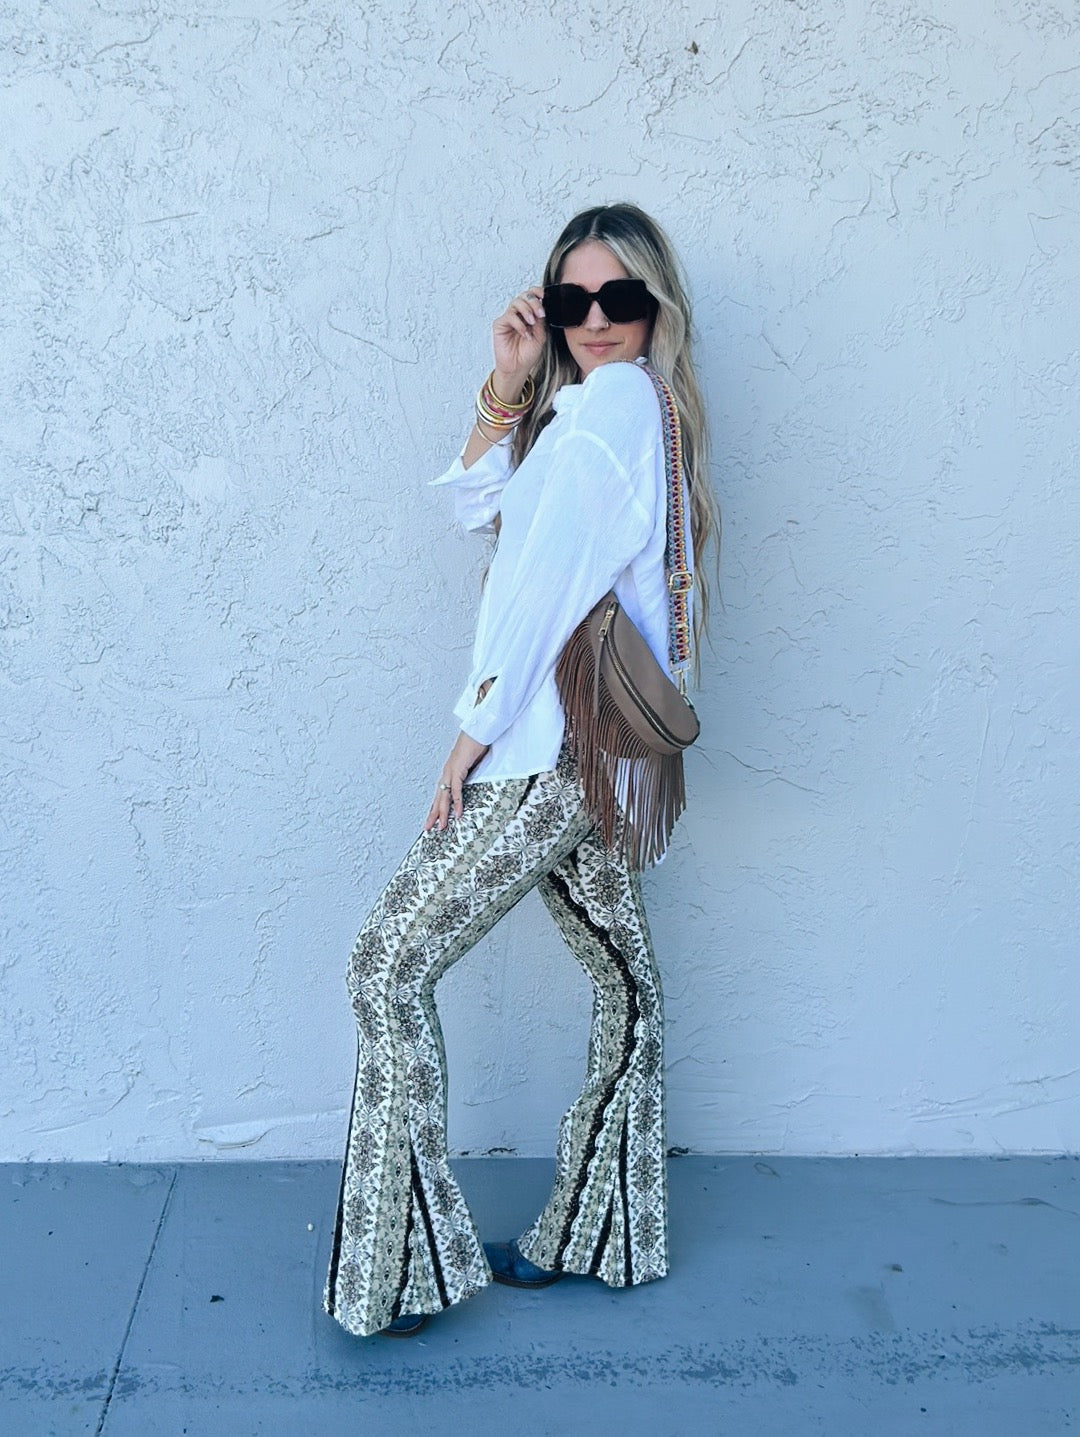 Stylish Green Floral Flare Pants for a Boho-Chic Look